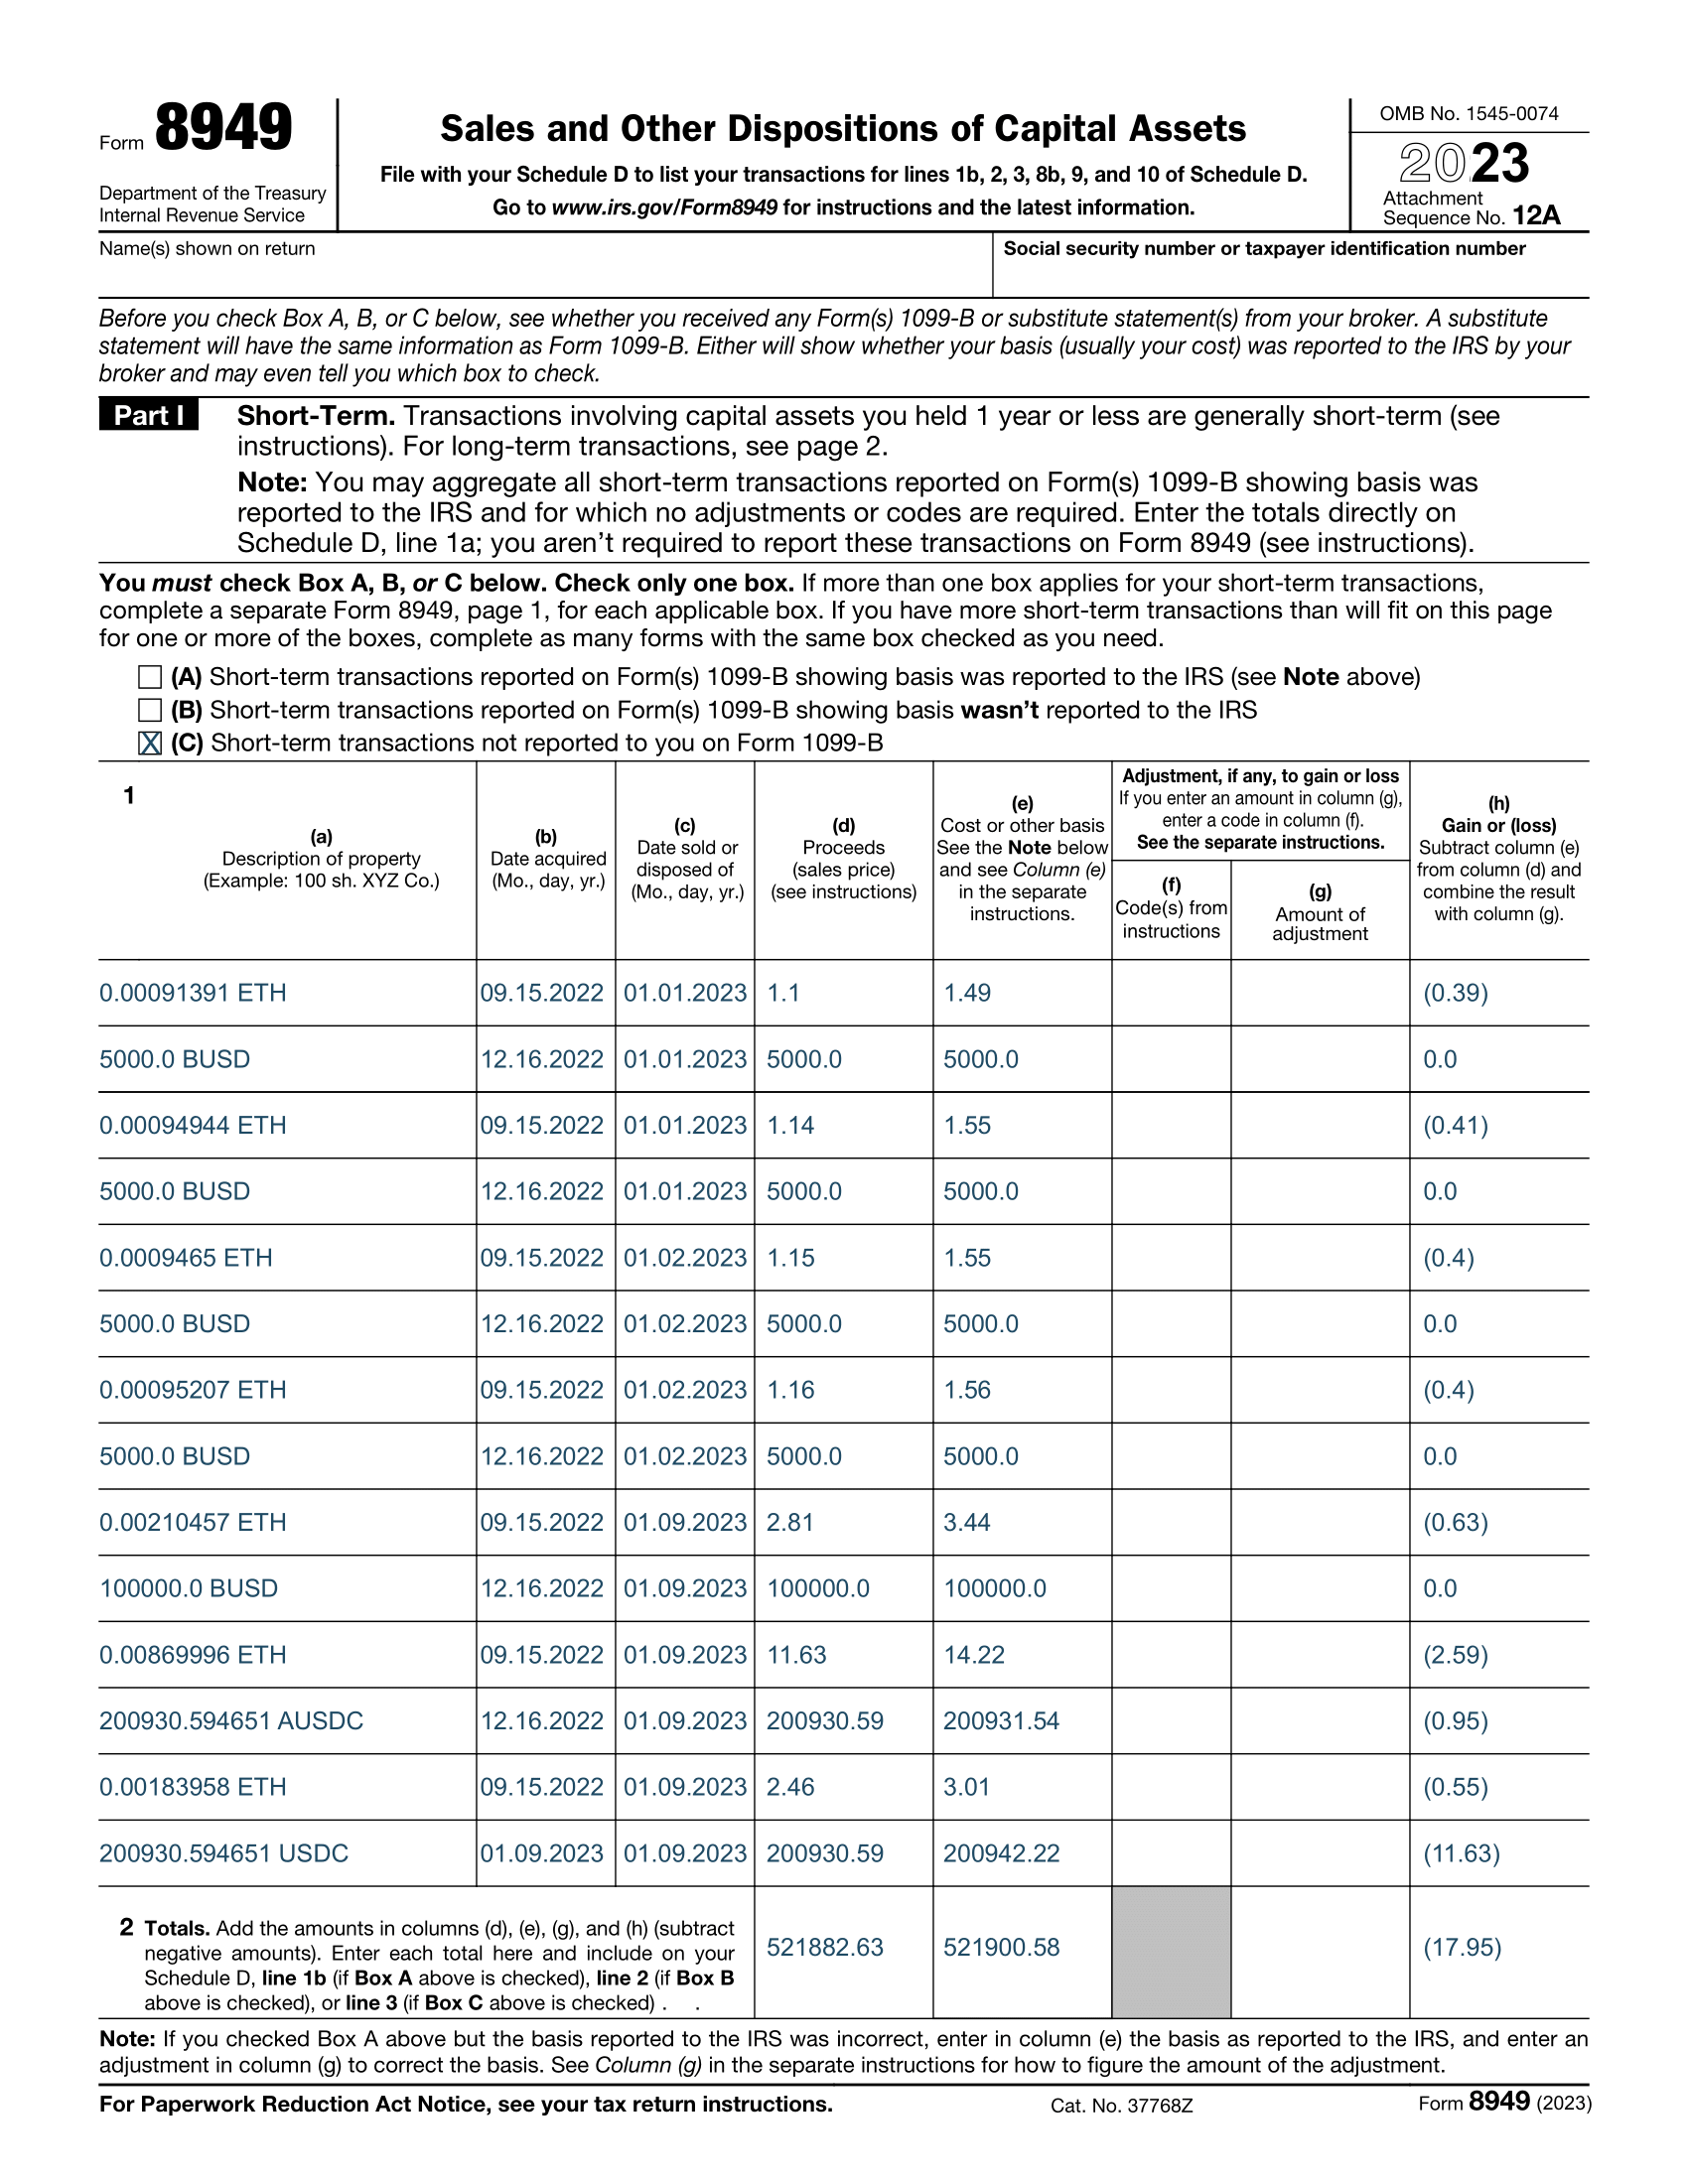 Form 8949 Example Filled Out